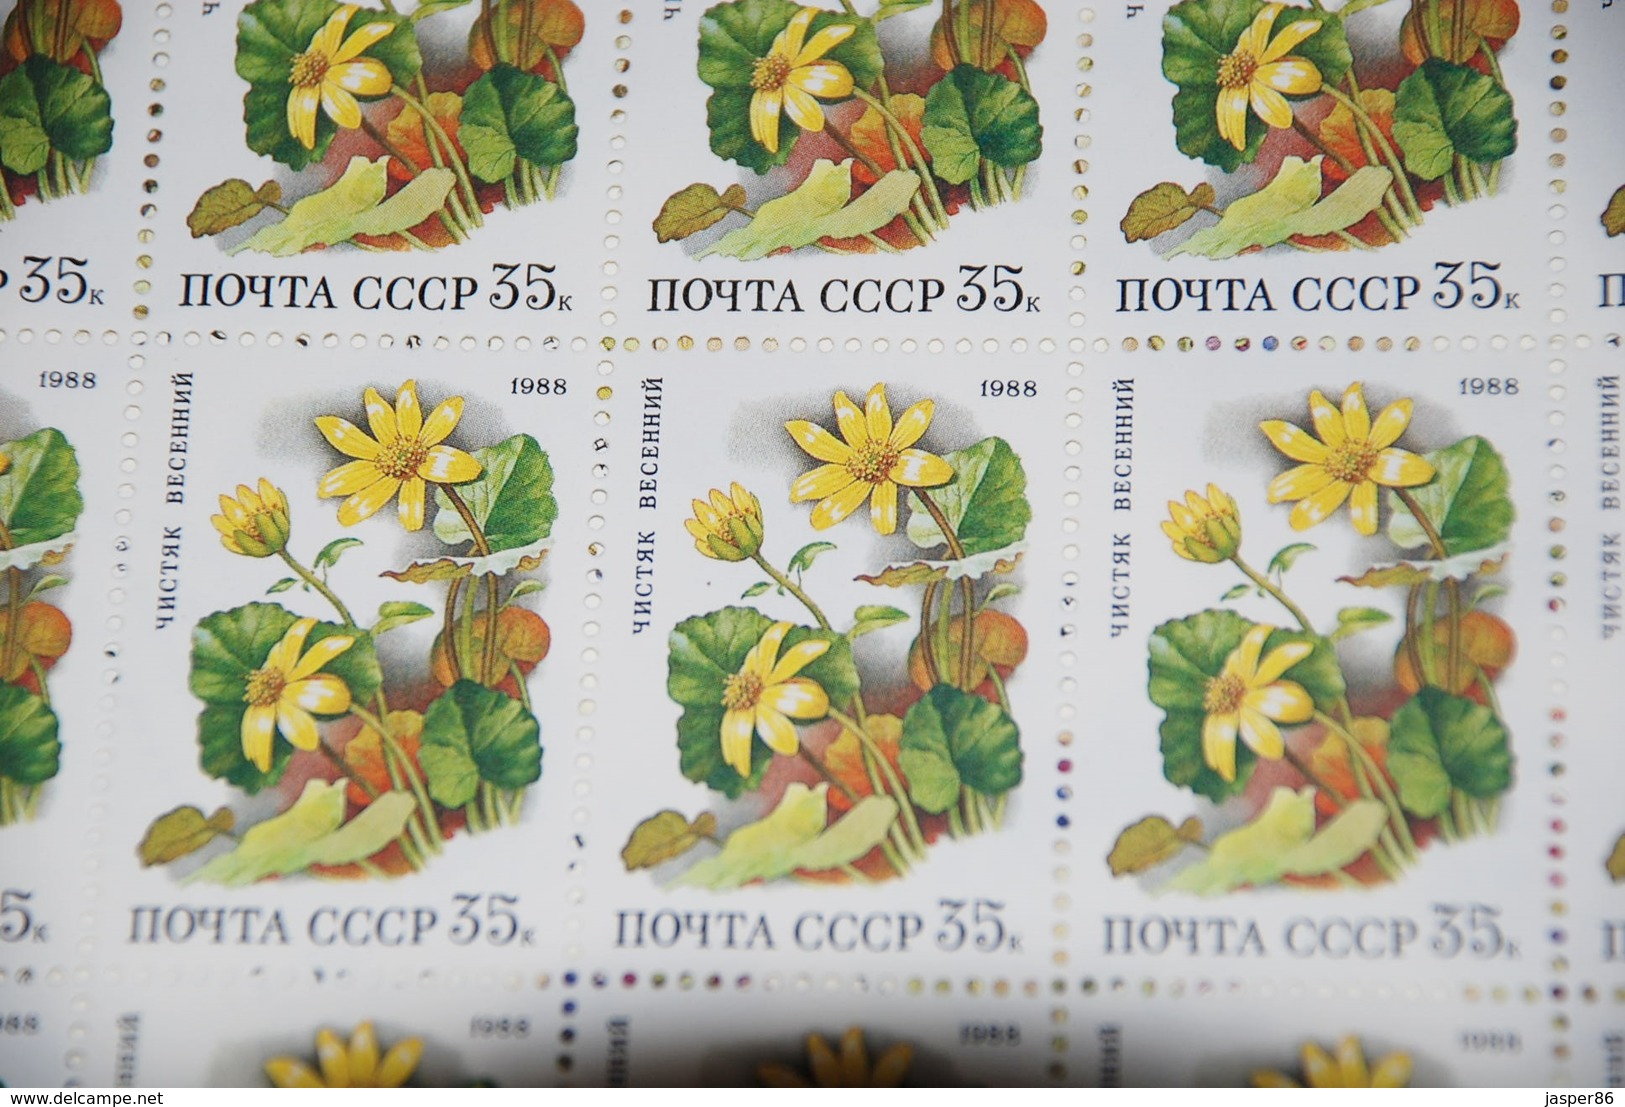 Russia MNH Sc 5687-5691 Mi 5847-5851 Bell Flower, Lily Complete Sheets CV$100.80 - Hojas Completas